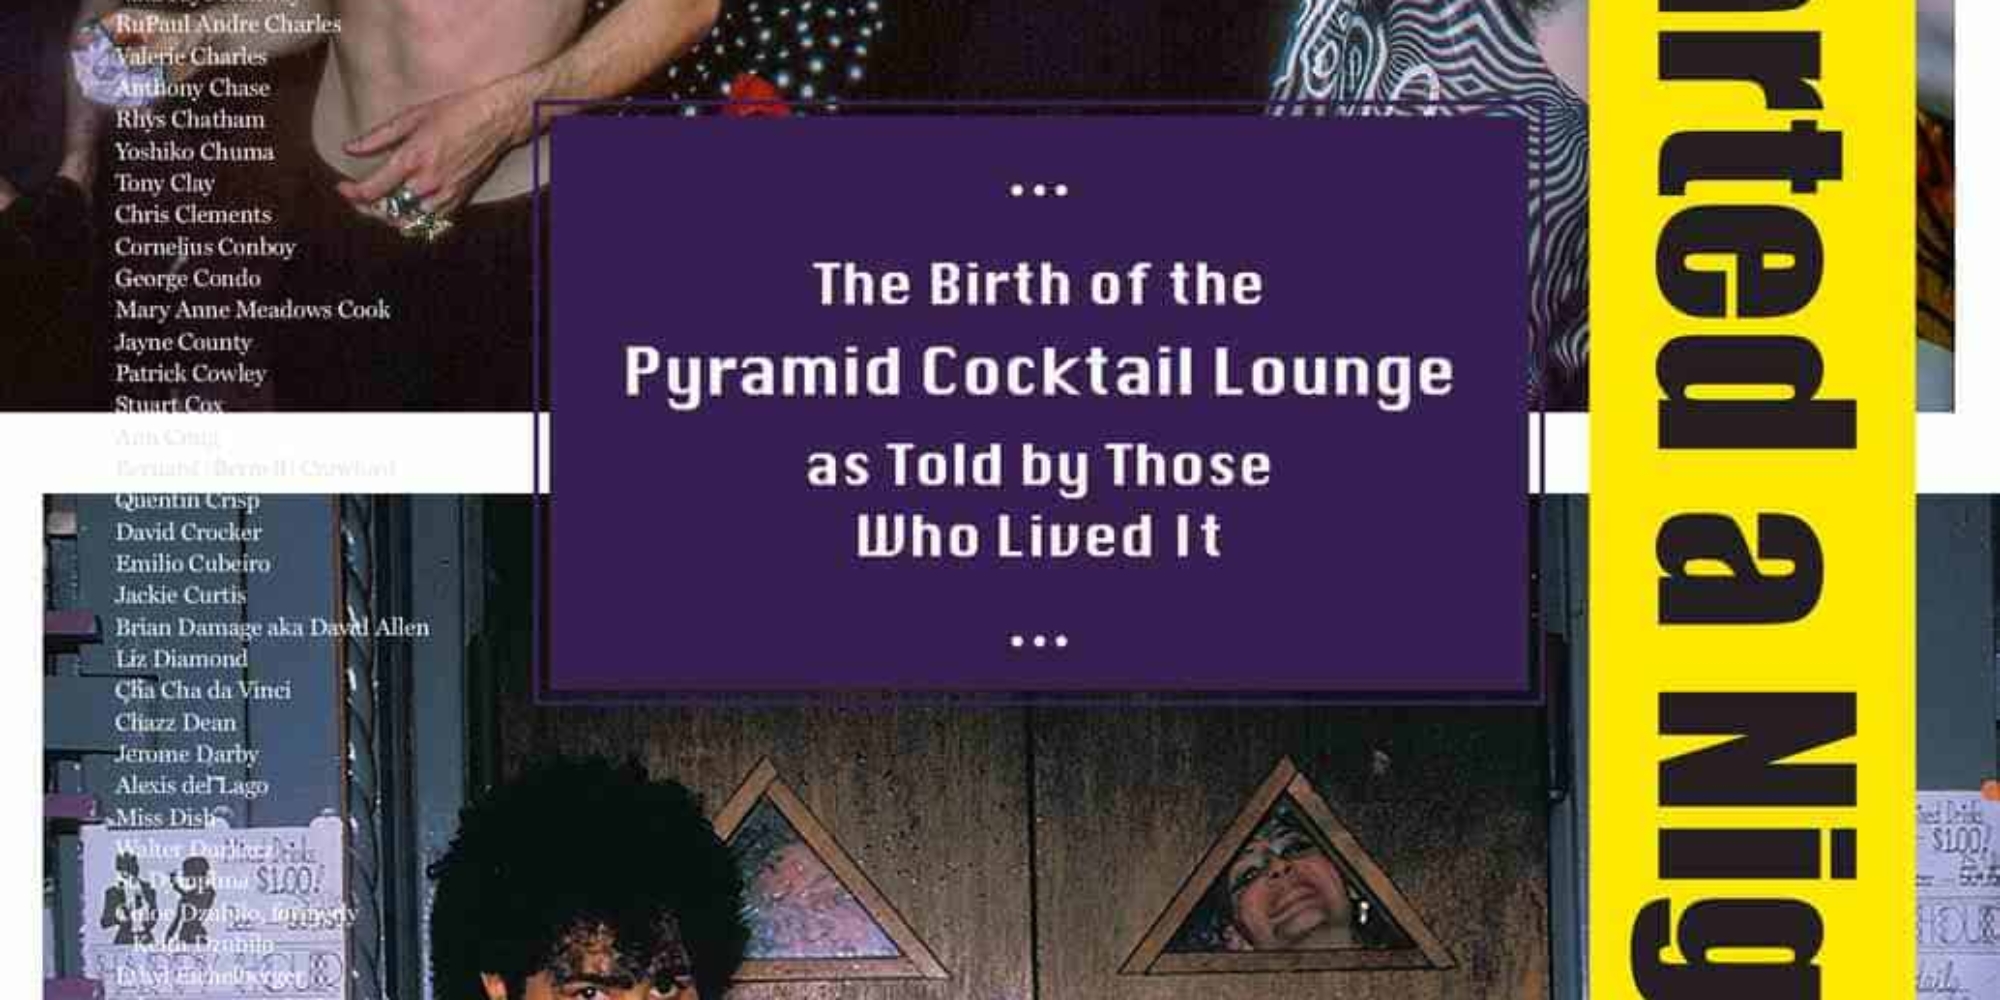 “We Started a Nightclub”: The Birth of the Pyramid Cocktail Lounge as Told by Those Who Lived It